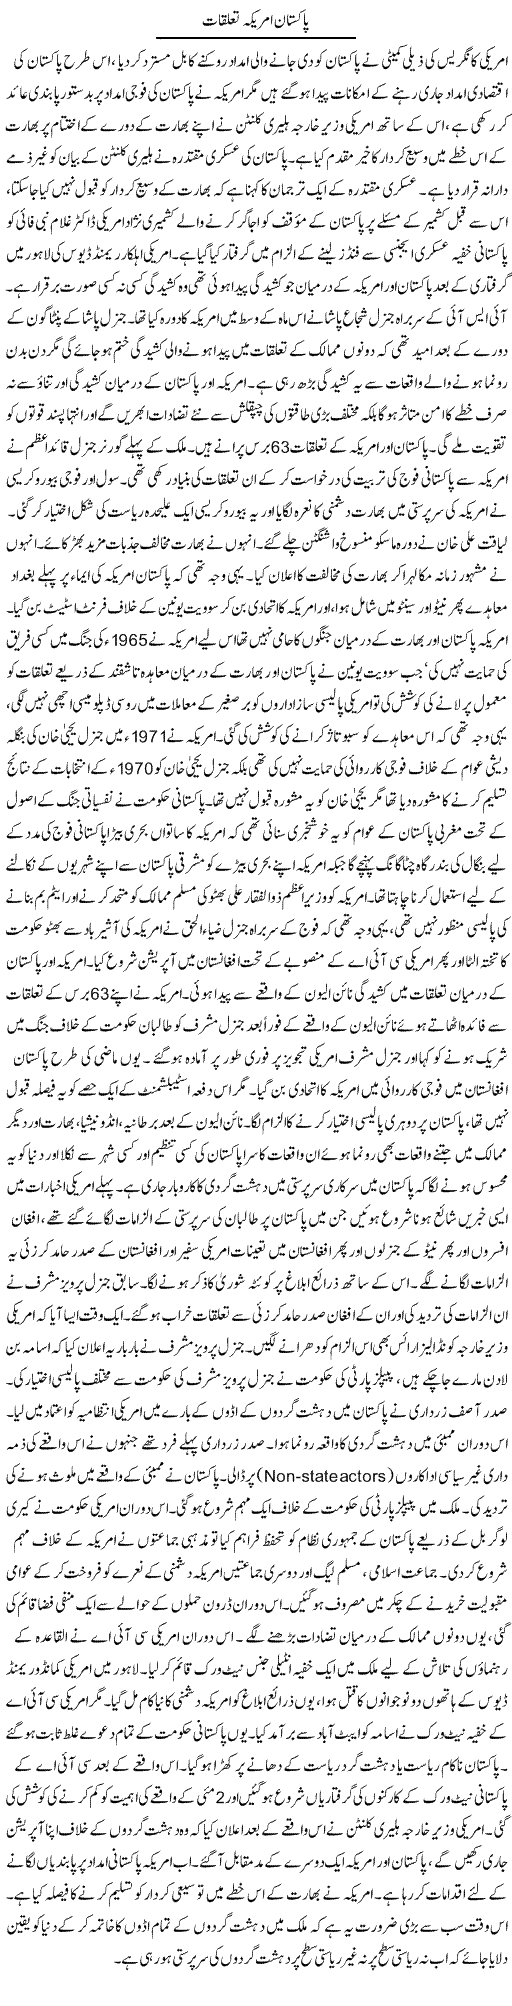 US Pakistan Relations Express Column Tauseef Ahmed 27 July 2011